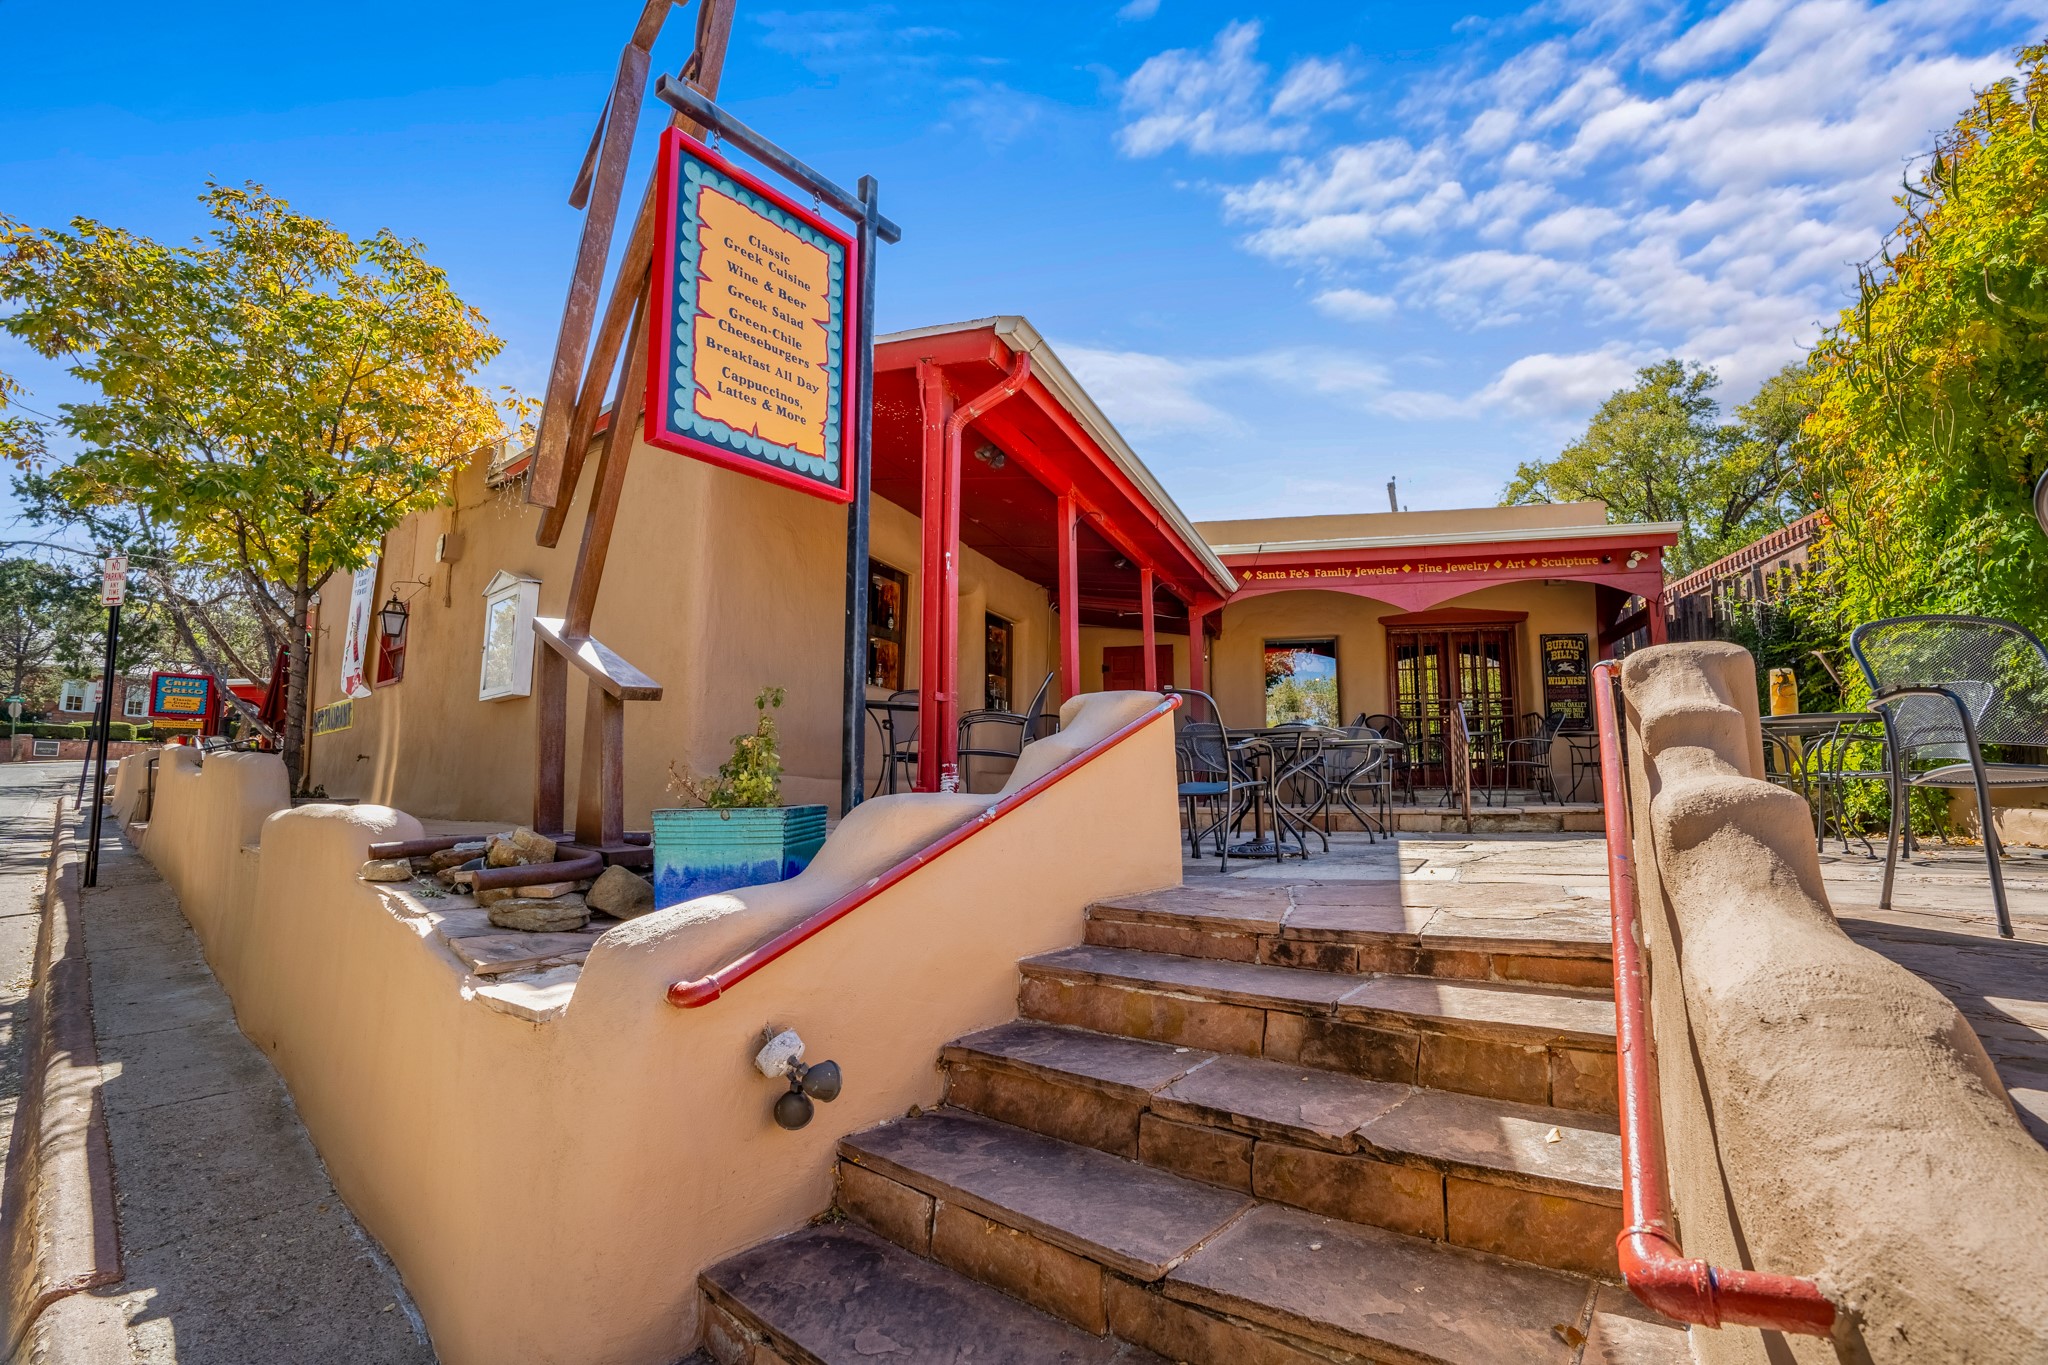 233 CANYON Road, Santa Fe, New Mexico 87501, ,Commercial Sale,For Sale,233 CANYON Road,202341335